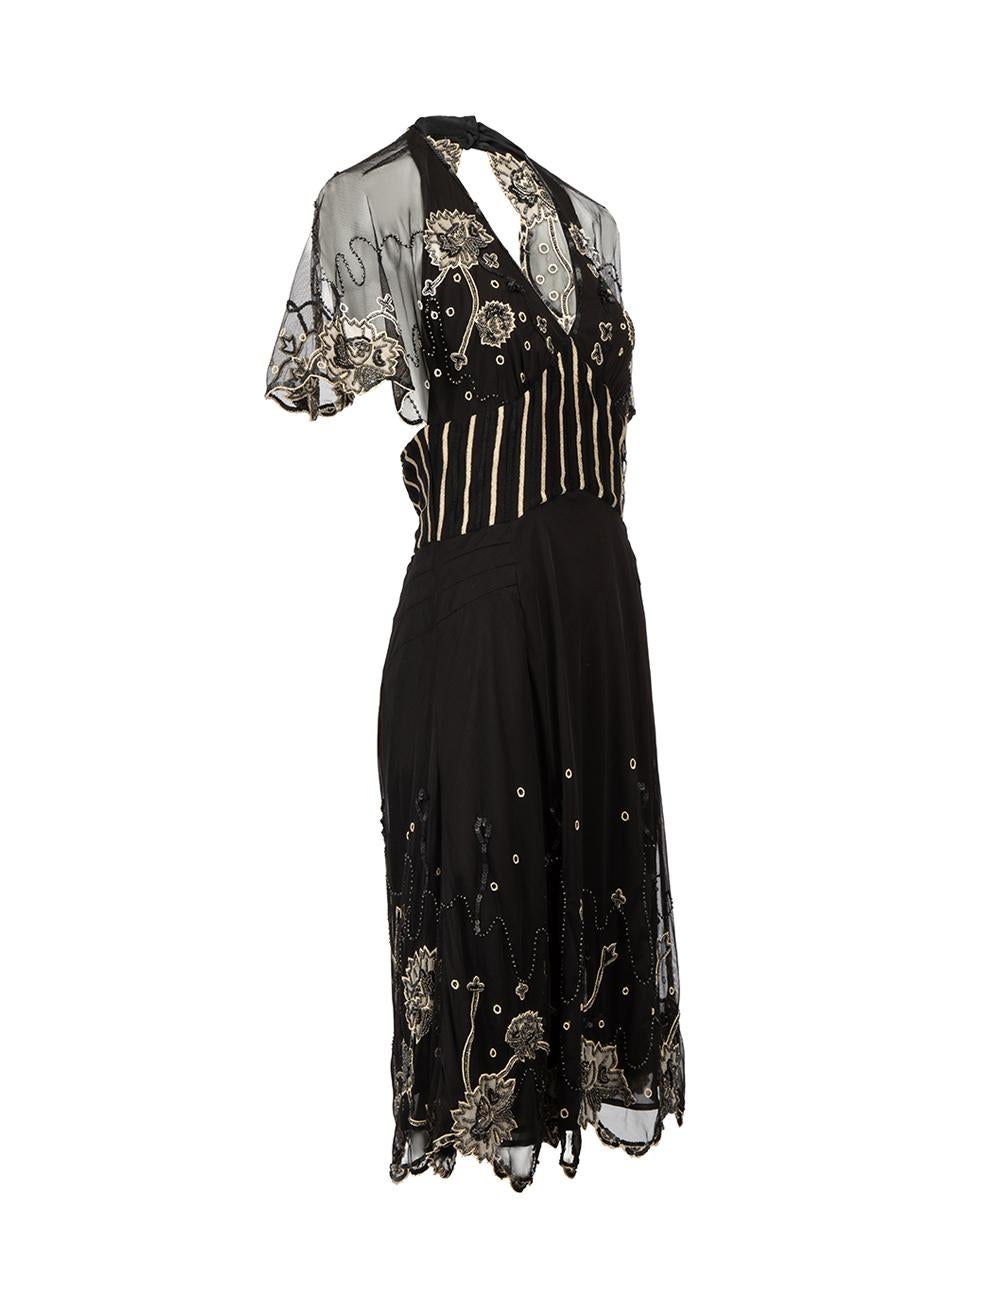 CONDITION is Very good. Hardly any visible wear to dress is evident on this used Temperley London designer resale item. 



Details


Black

Polyester

Knee length dress

Floral beaded embellishment accent

Halter V neckline

Sheer sleeves